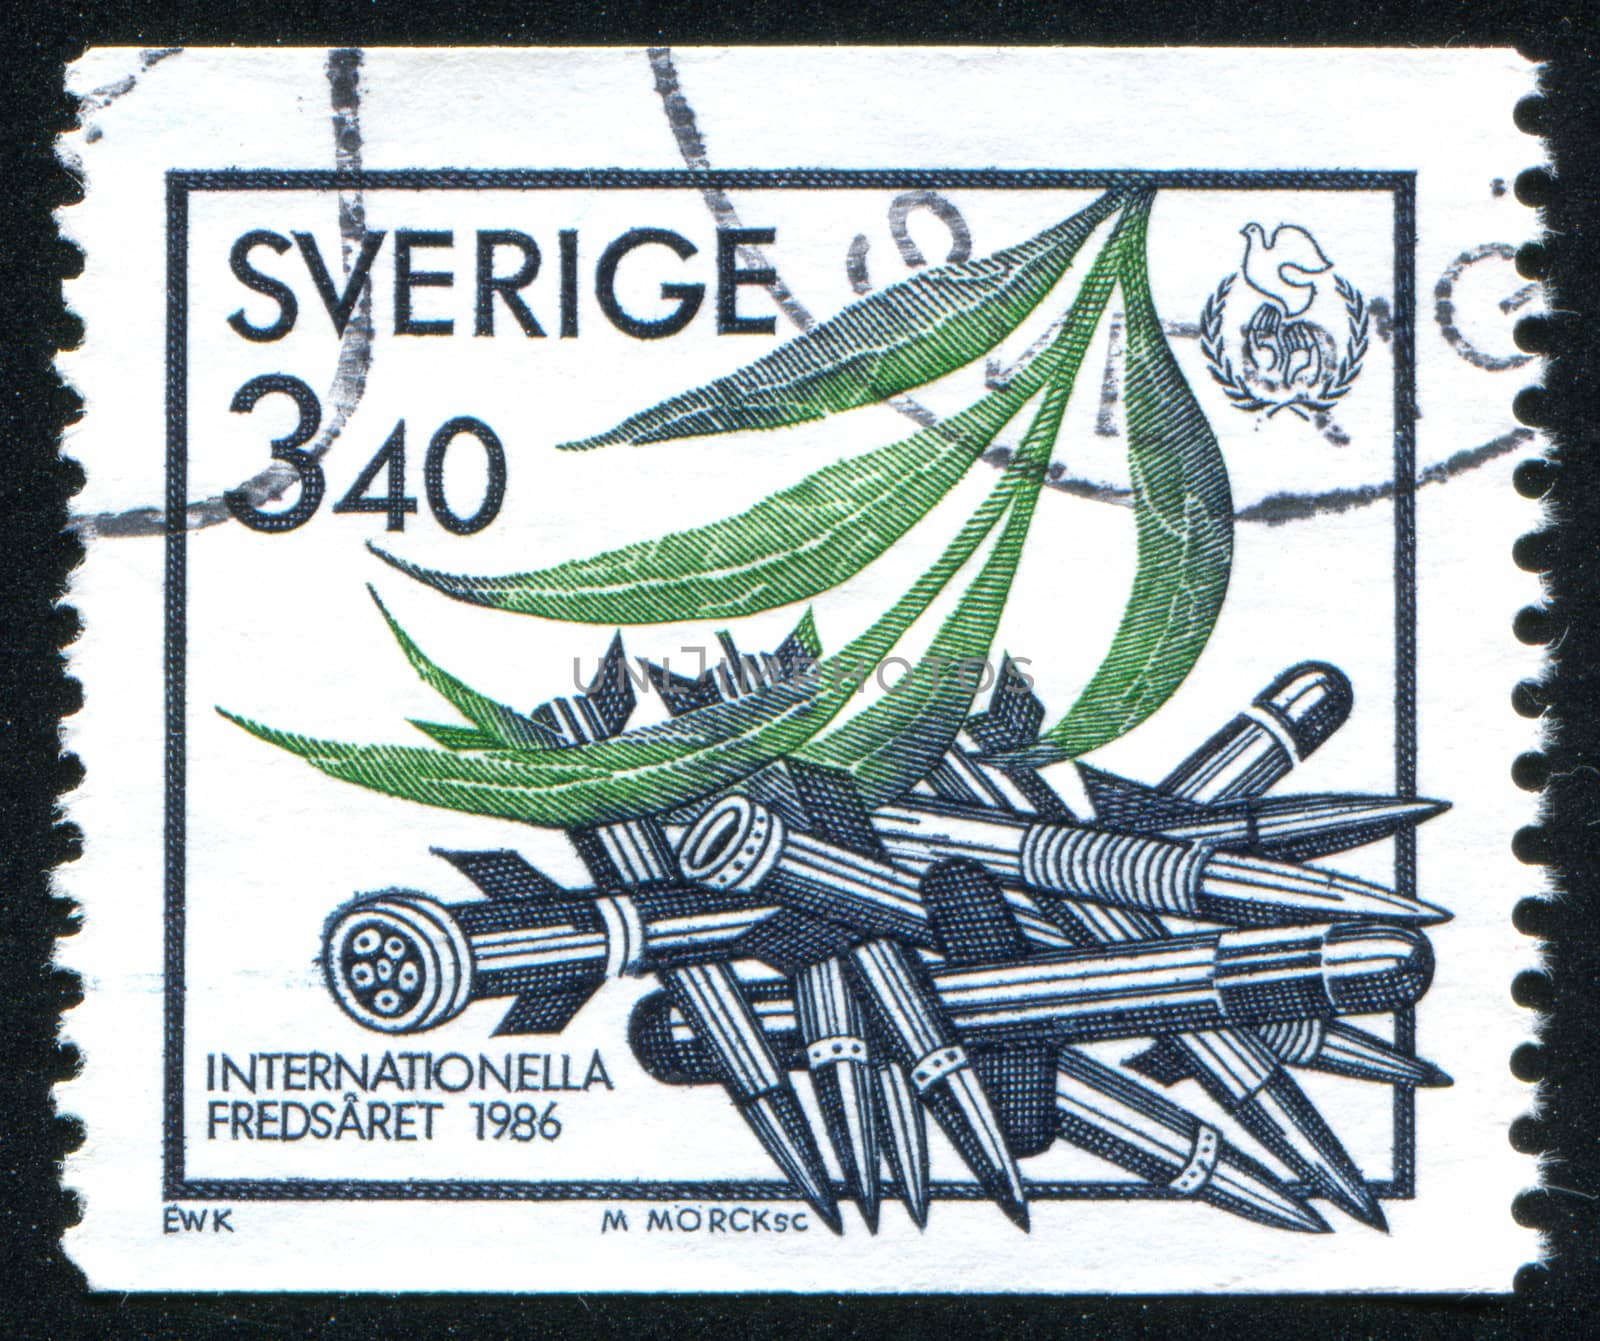 SWEDEN - CIRCA 1986: stamp printed by Sweden, shows International Peace Year emblem, circa 1986